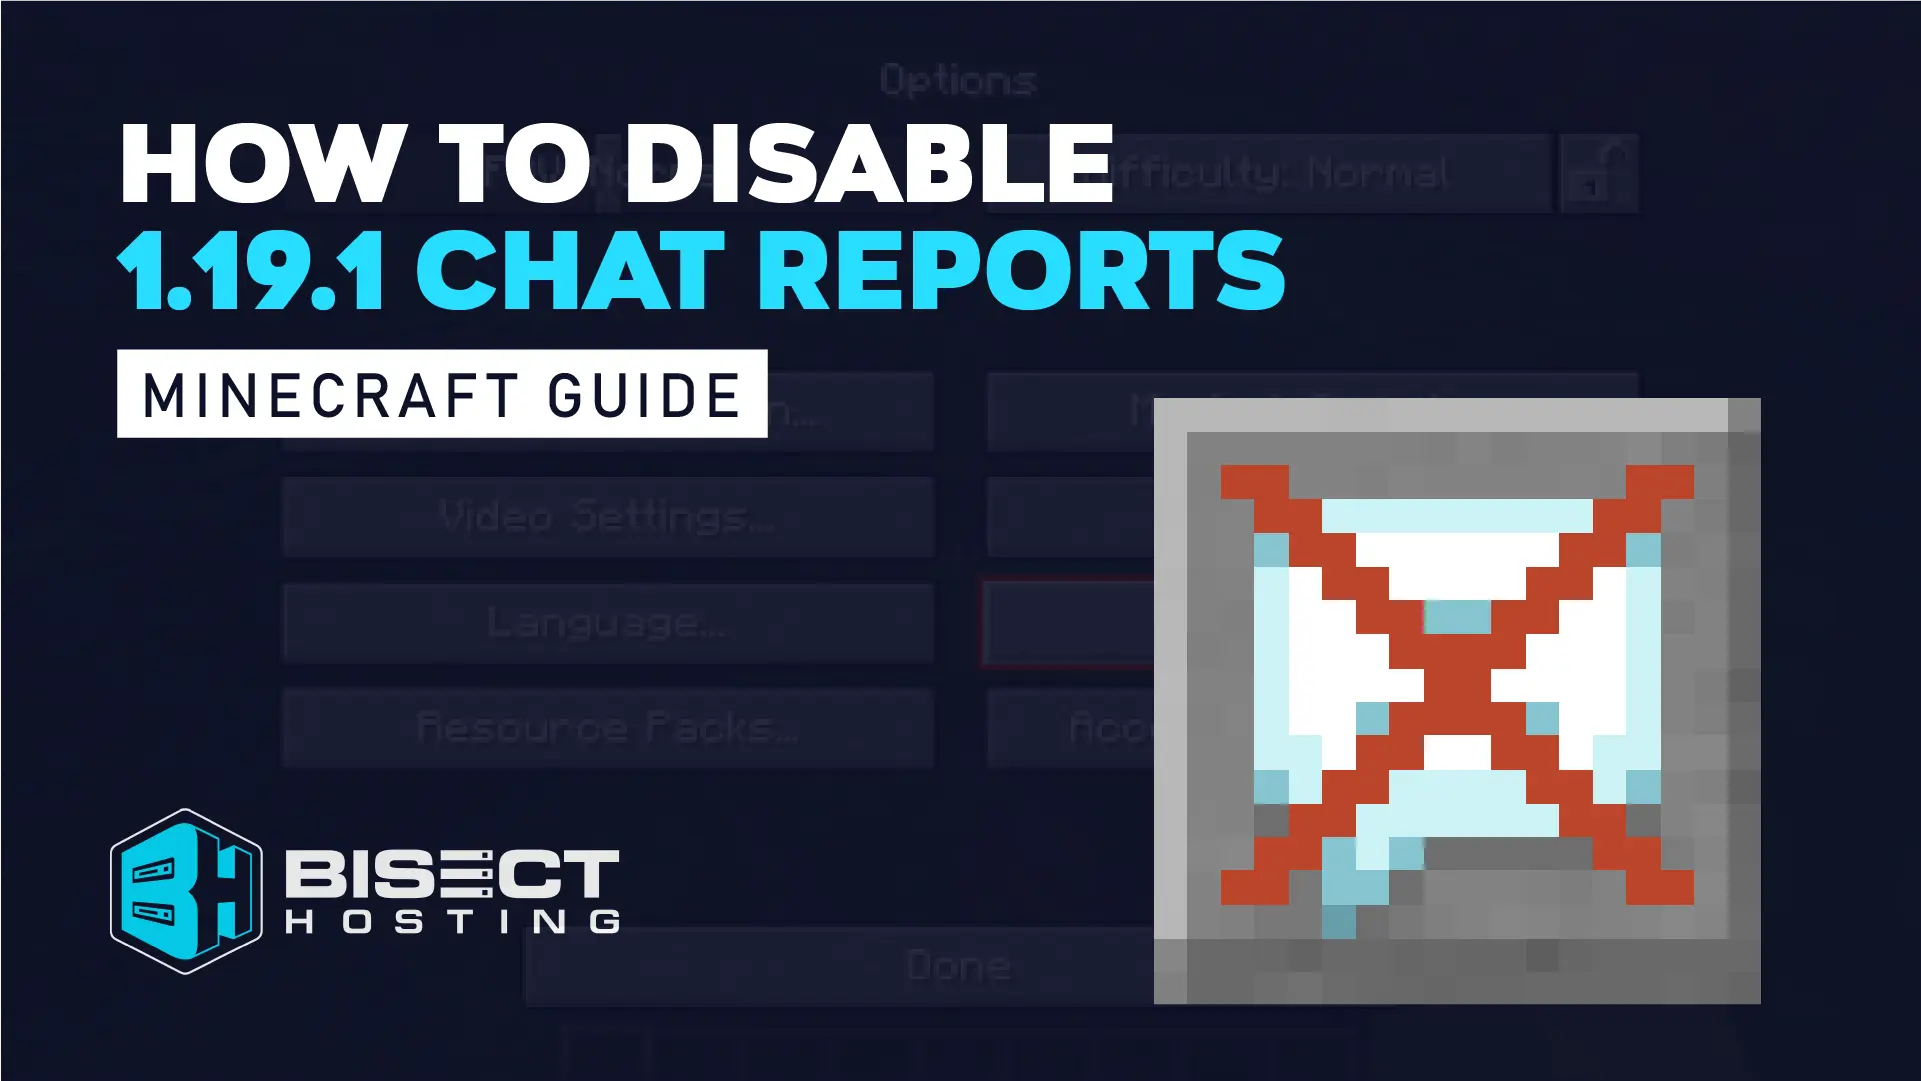 How to Disable Minecraft 1.19.1 Chat Reports